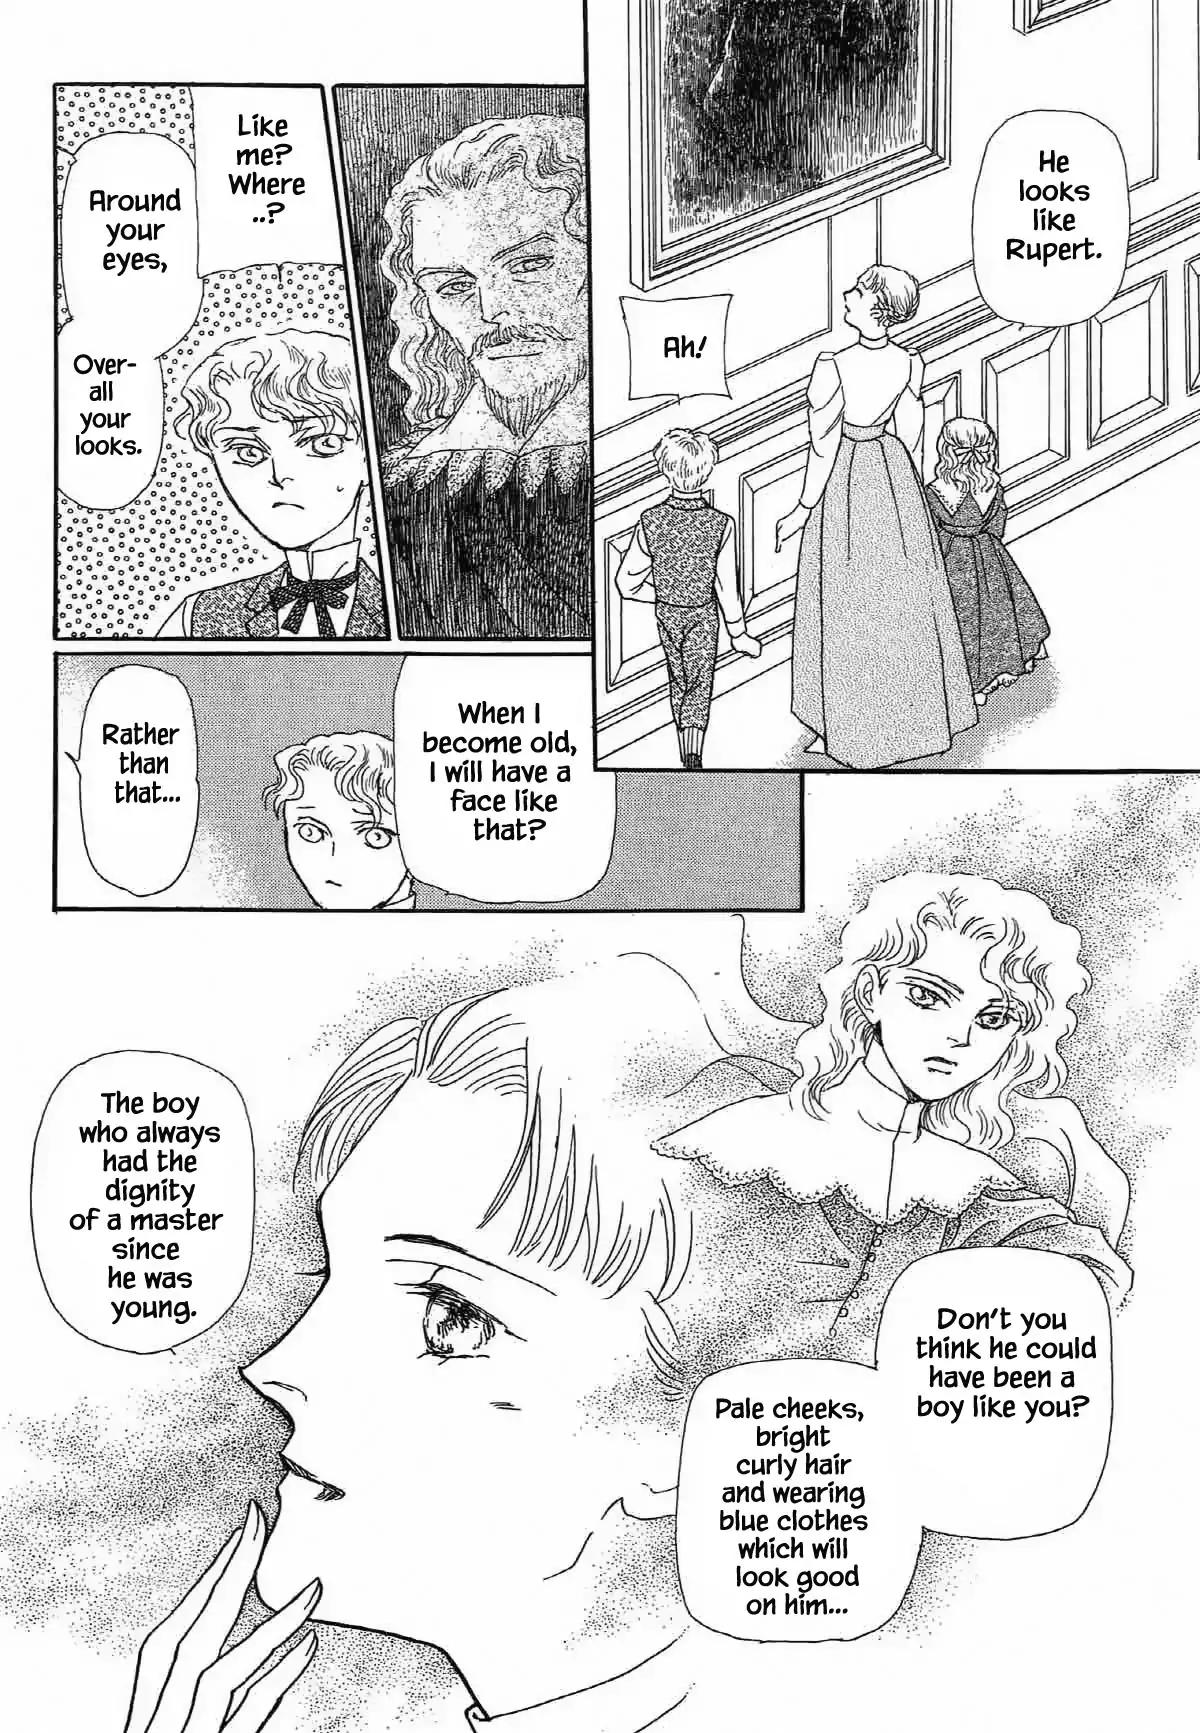 Beautiful England Series Vol.2 Chapter 14.2